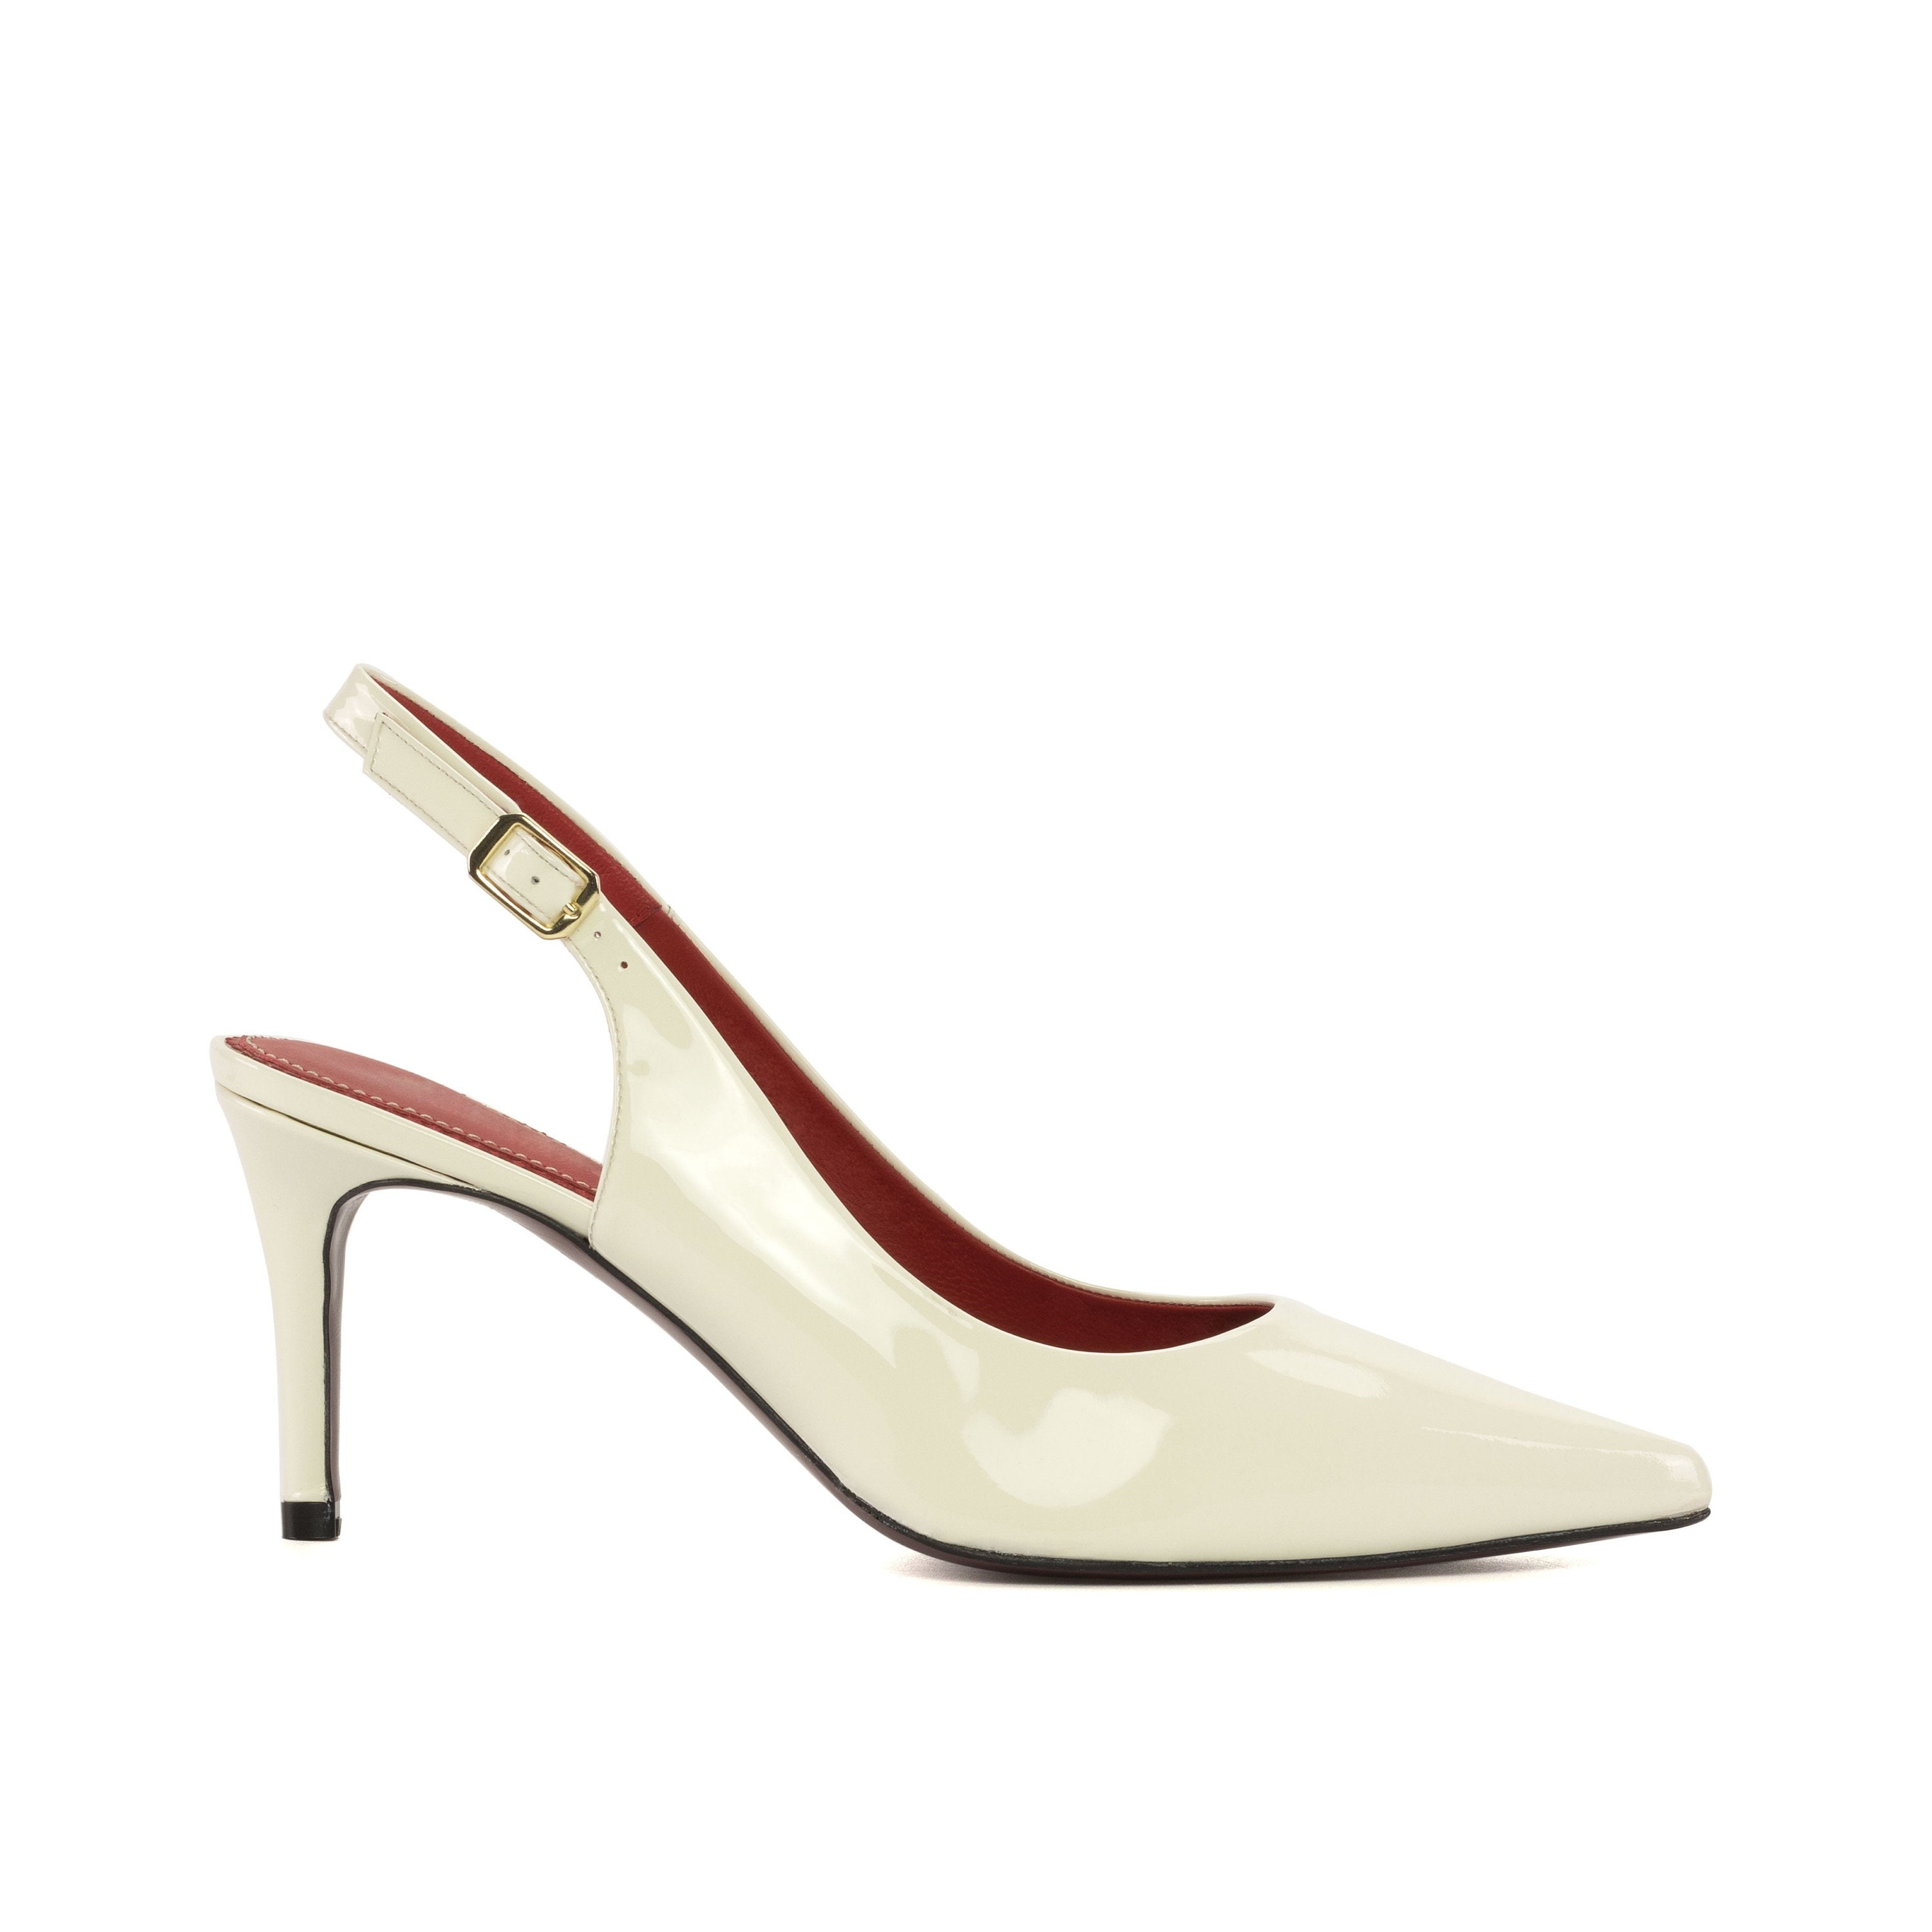 Handmade Designer White Heels With Red Sole Pumps for 